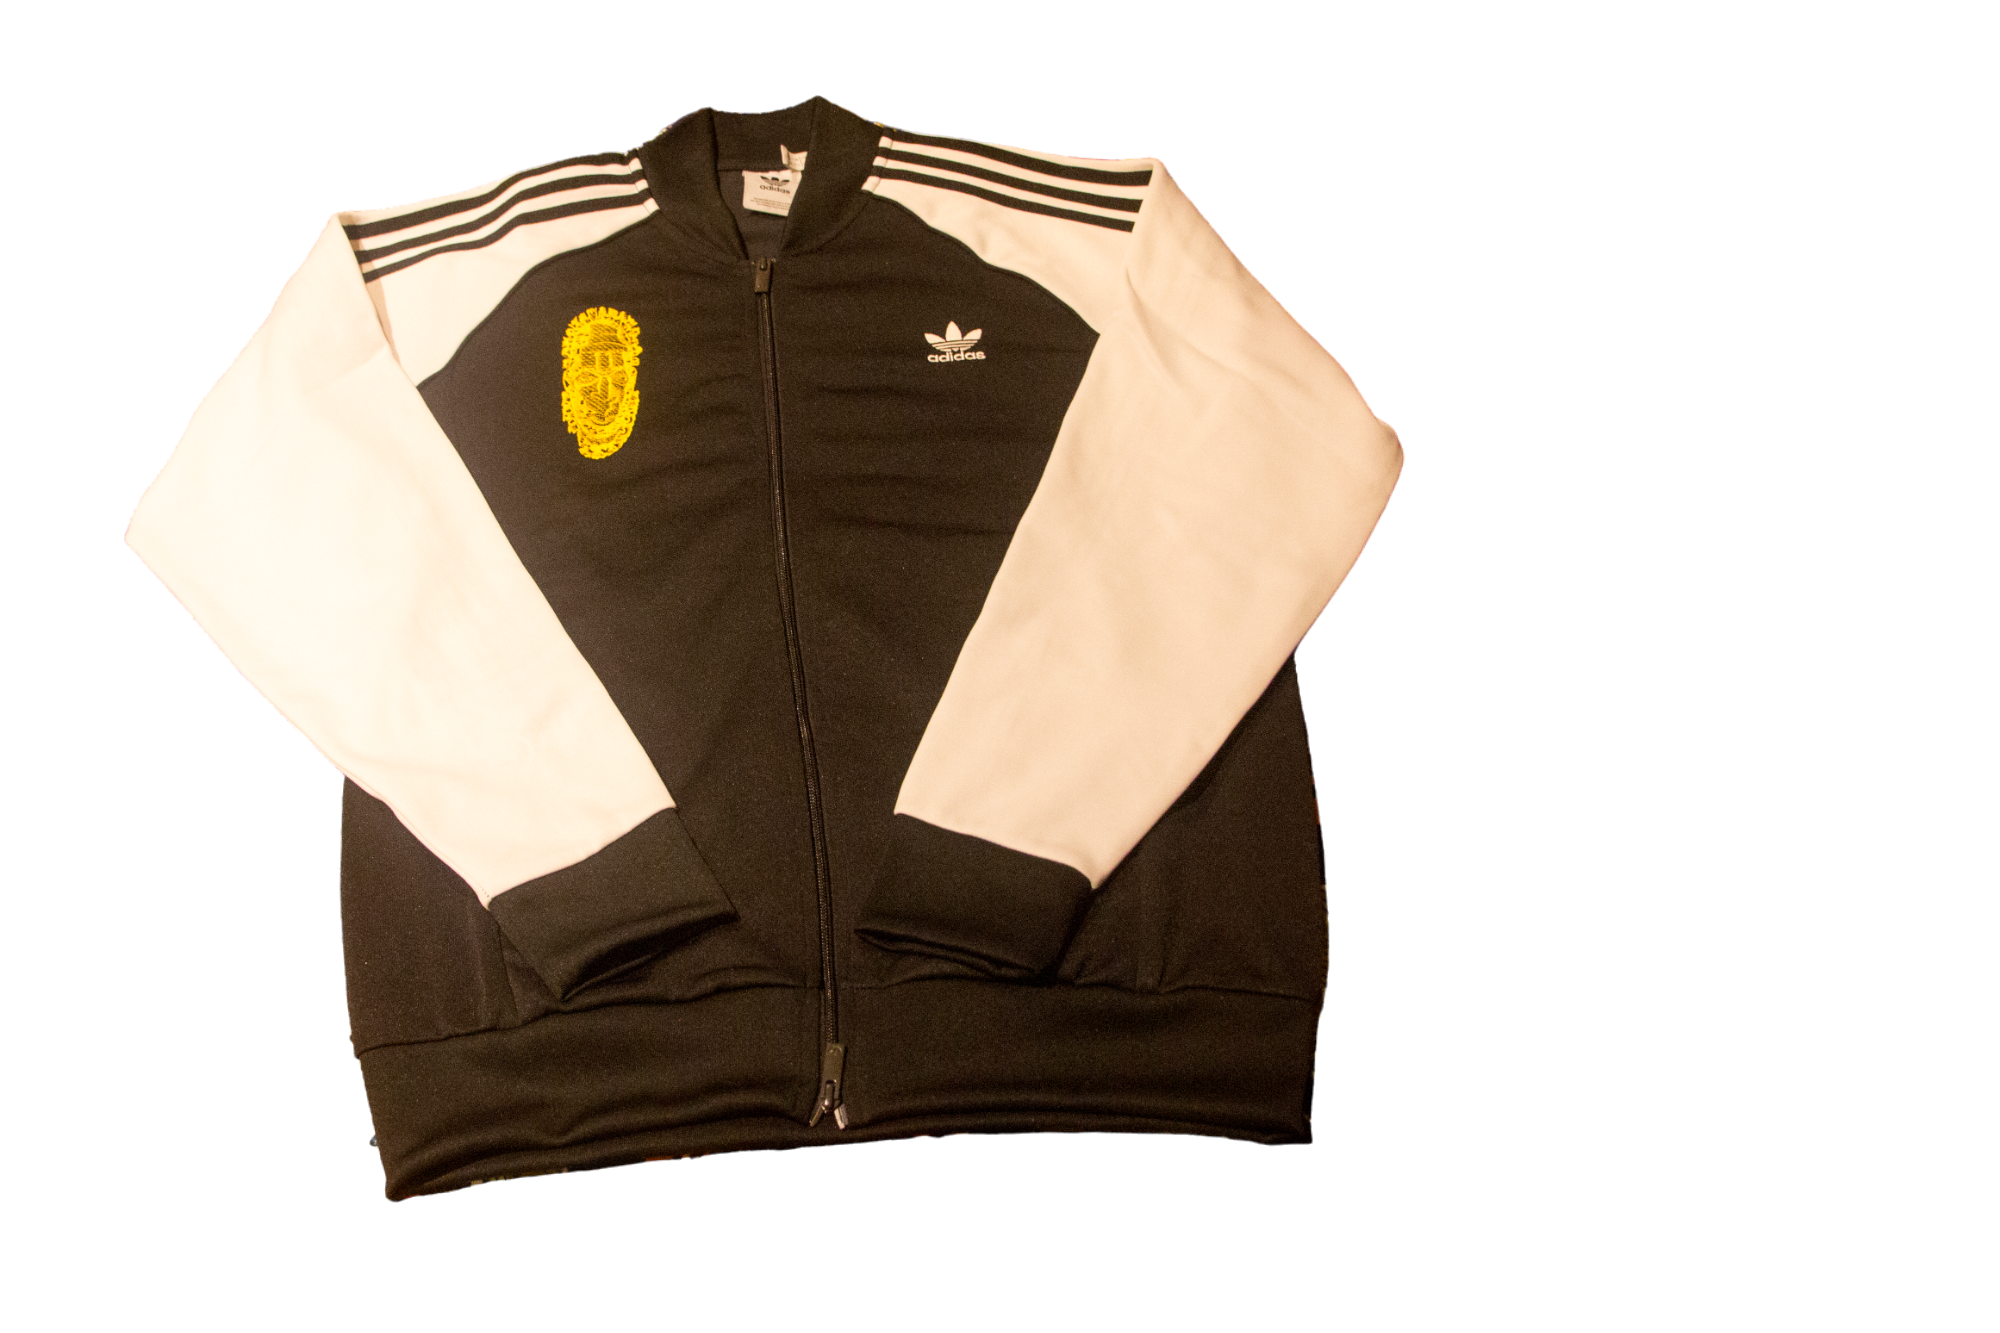 Special Edition: Re-Worked Adidas Iyoba Idia Embroidered Tracksuit Top (Black/White/Gold)